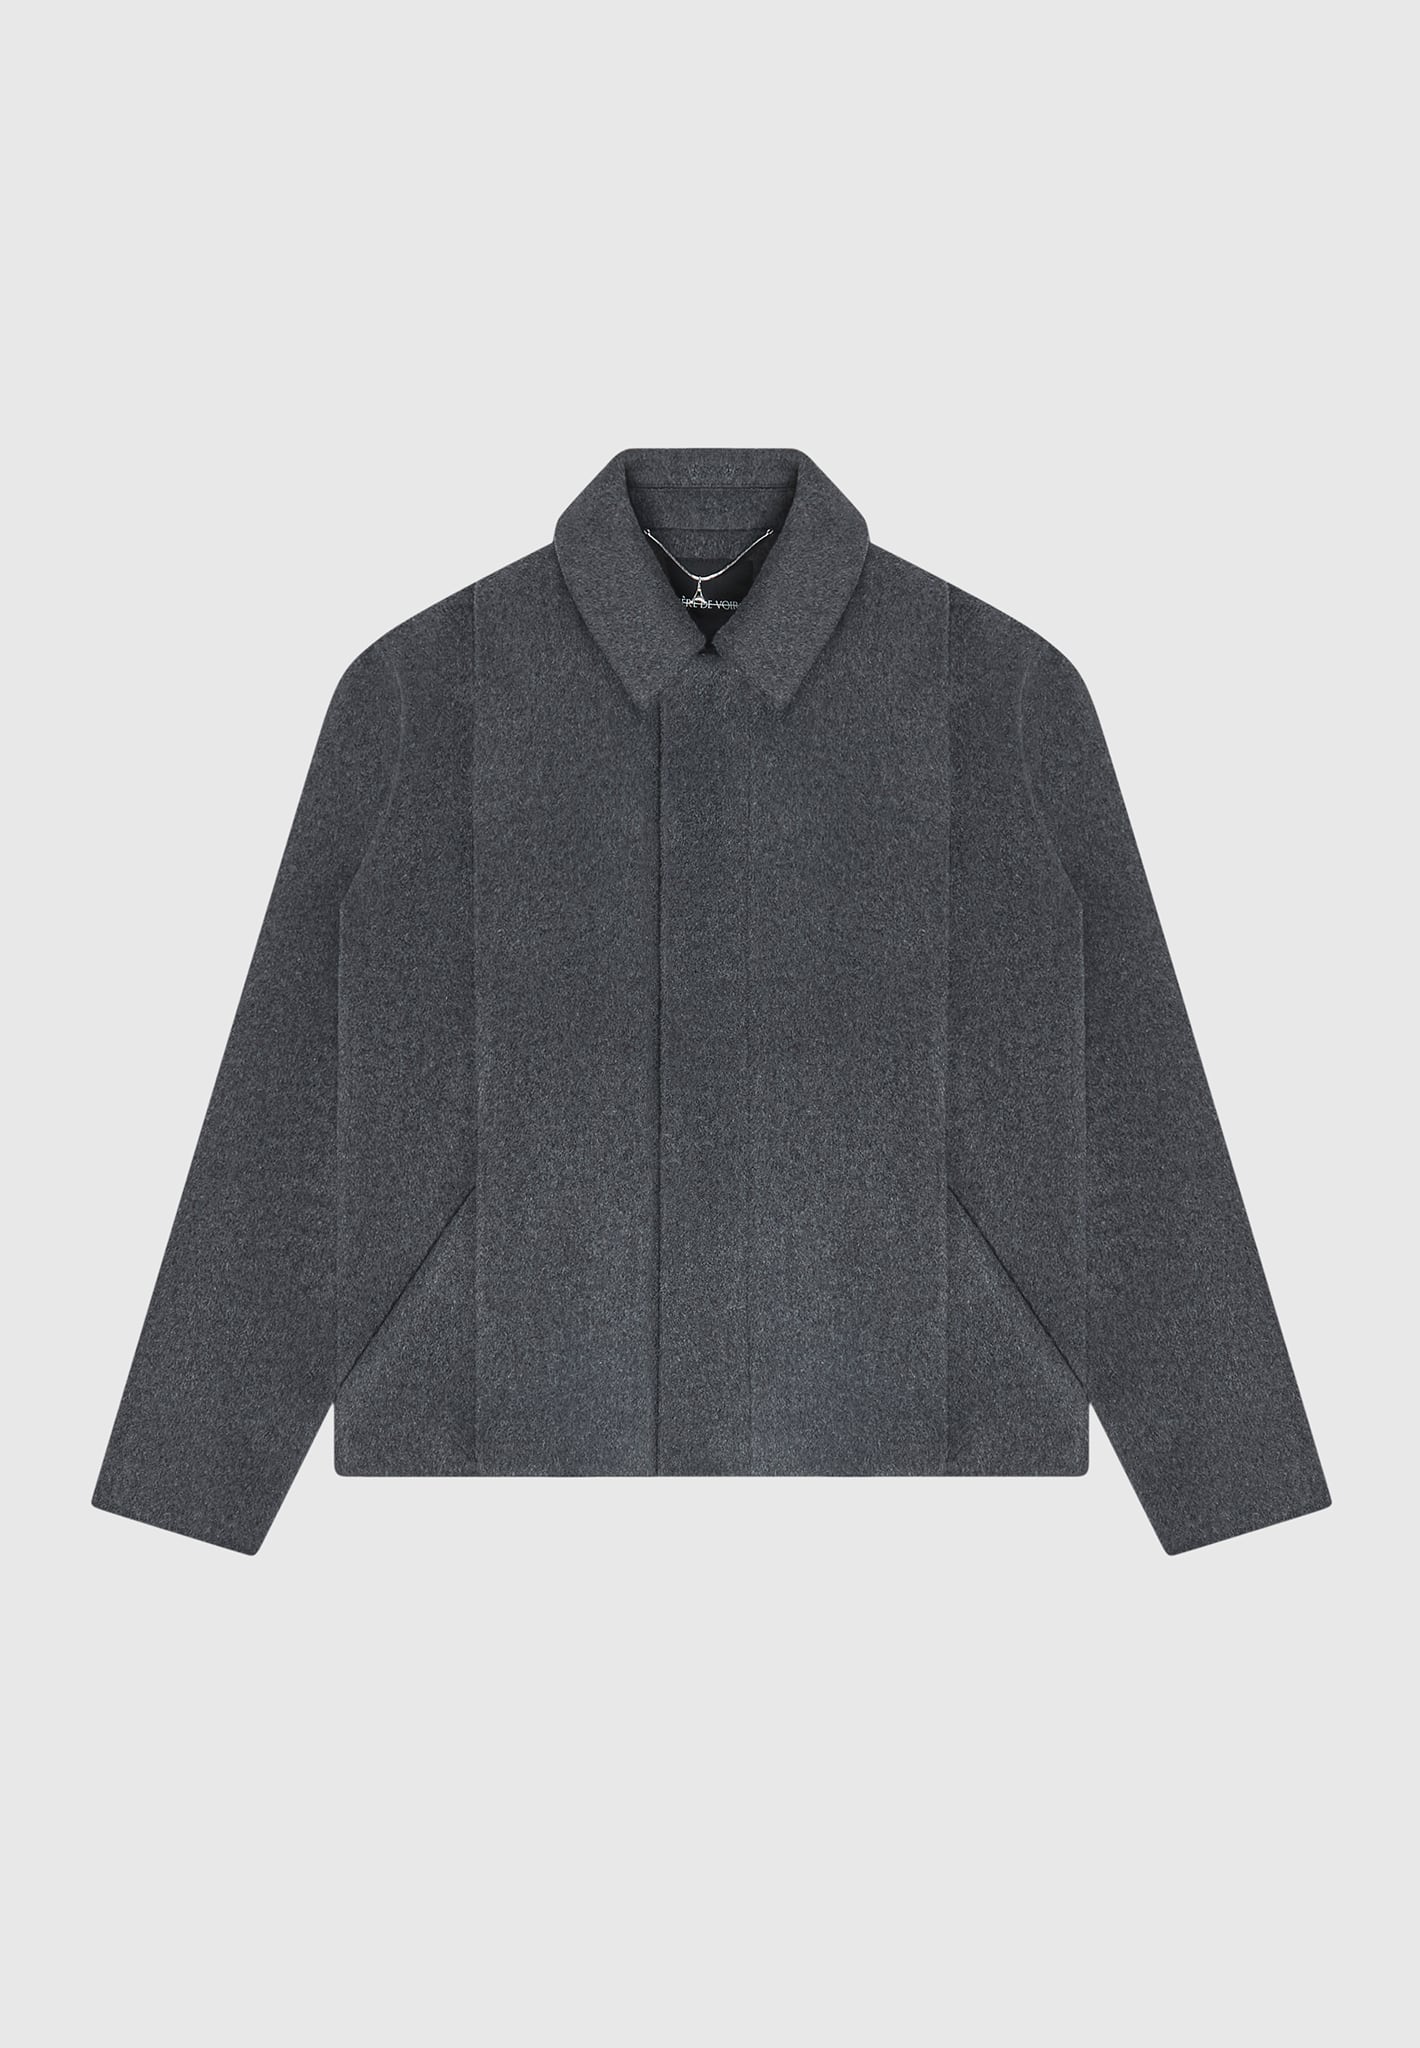 Wool Blend Boxy Jacket with Pleat - Charcoal Grey